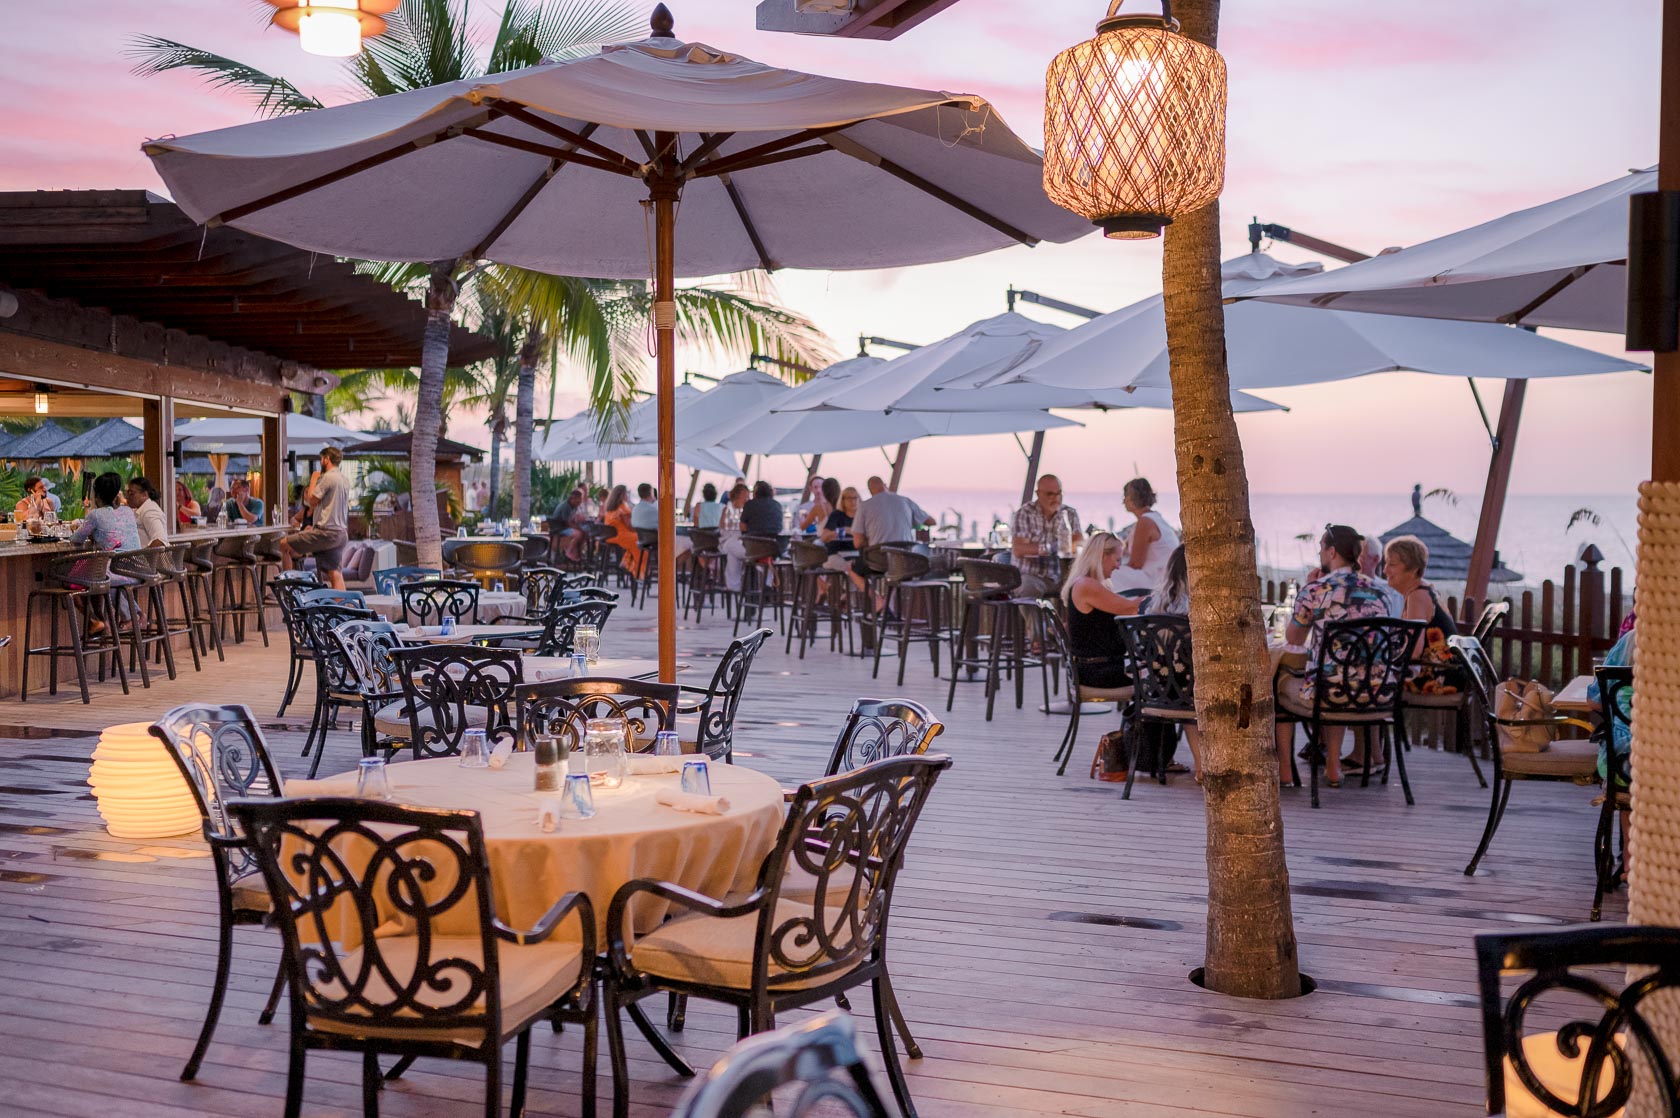 Casual Beachfront restaurant in Turks and Caicos for families